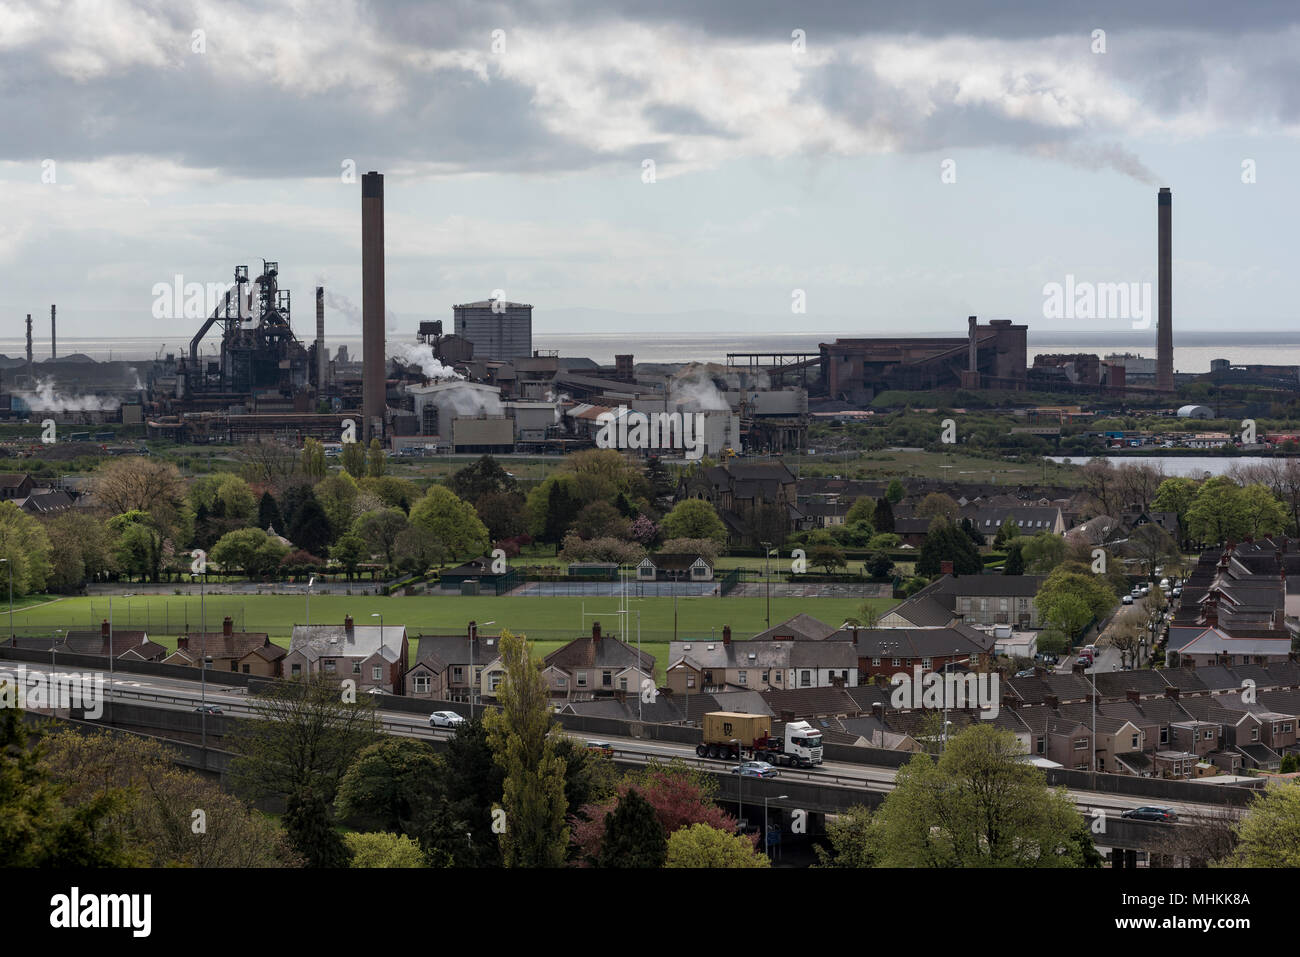 2nd May, 2018. Port Talbot, Wales, UK. Port Talbot in South Wales has the highest levles of air polliution of any town in the UK according to a new report by the World Health Organisation (WHO). Levels of the finest and possibly the most deadly PM2.5 particulates exceeded those of cities such as London with 18 micrograms per cubic metre. Another steel town, Scunthorpe , was second.  Port Talbot has a long history and reputation for having polluted air - it is home to the Tata steelworks and the M4 motorway passes right through on a raised section.   Picture Credit: IAN HOMER/Alamy Live News Stock Photo